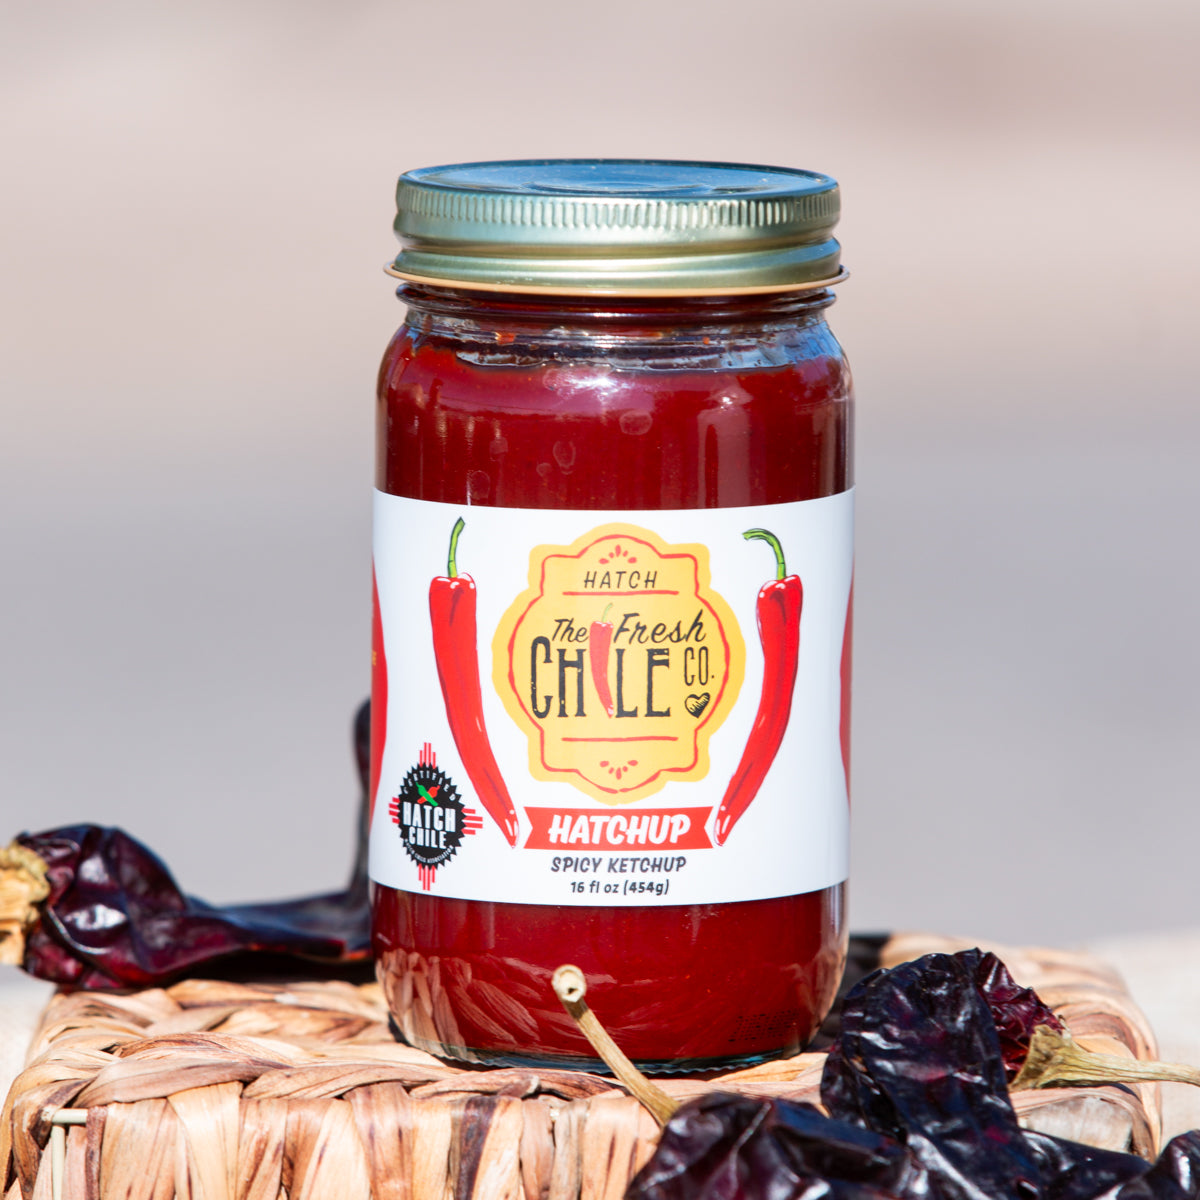 A jar of Spicy Hatch Red Chile Ketchup from The Fresh Chile Co. is displayed, with a label featuring red and green chile peppers. The jar sits on a woven mat accompanied by dried chiles.